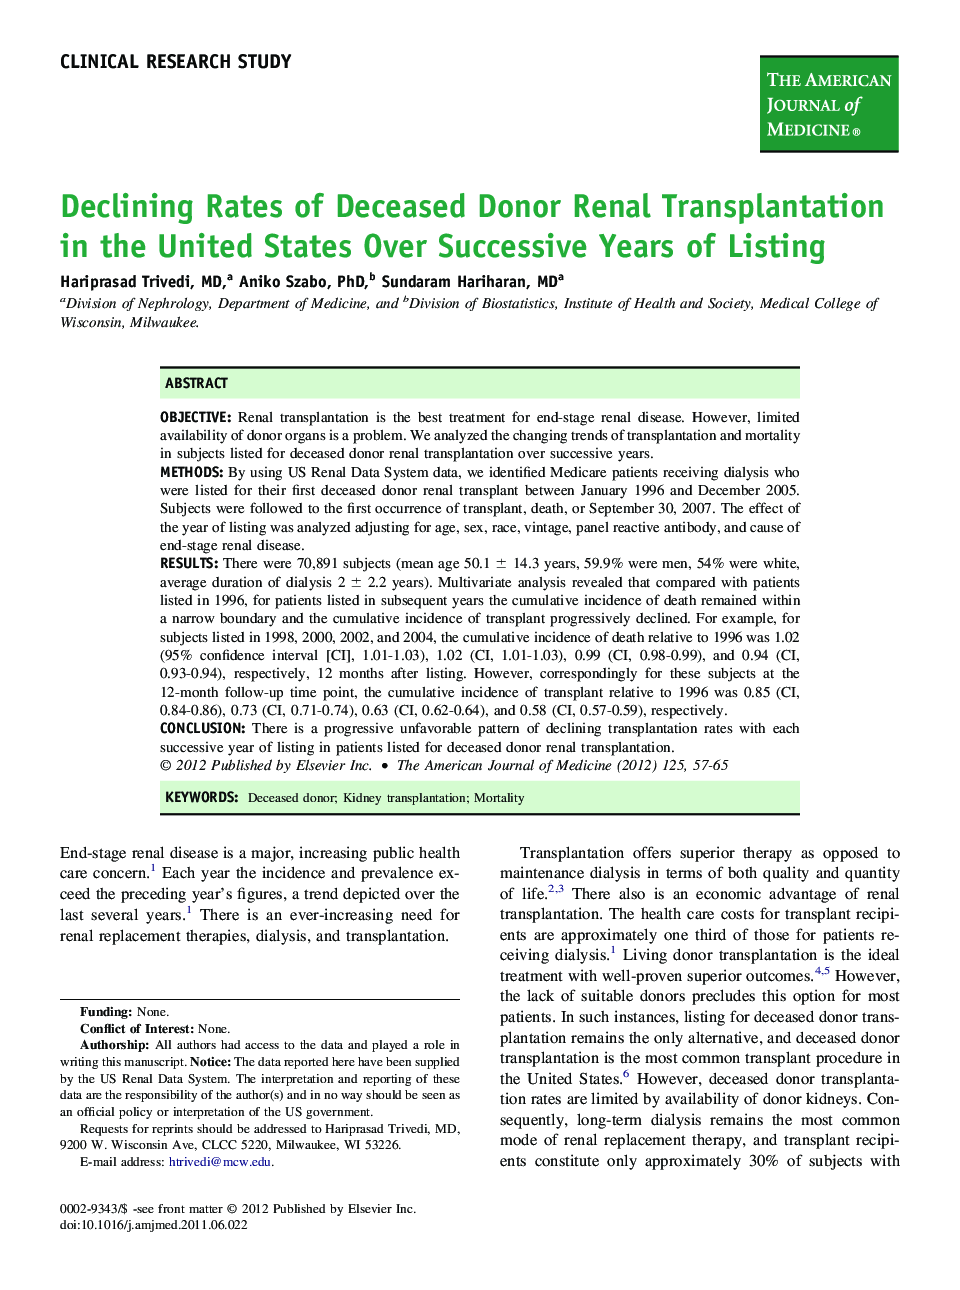 Declining Rates of Deceased Donor Renal Transplantation in the United States Over Successive Years of Listing 